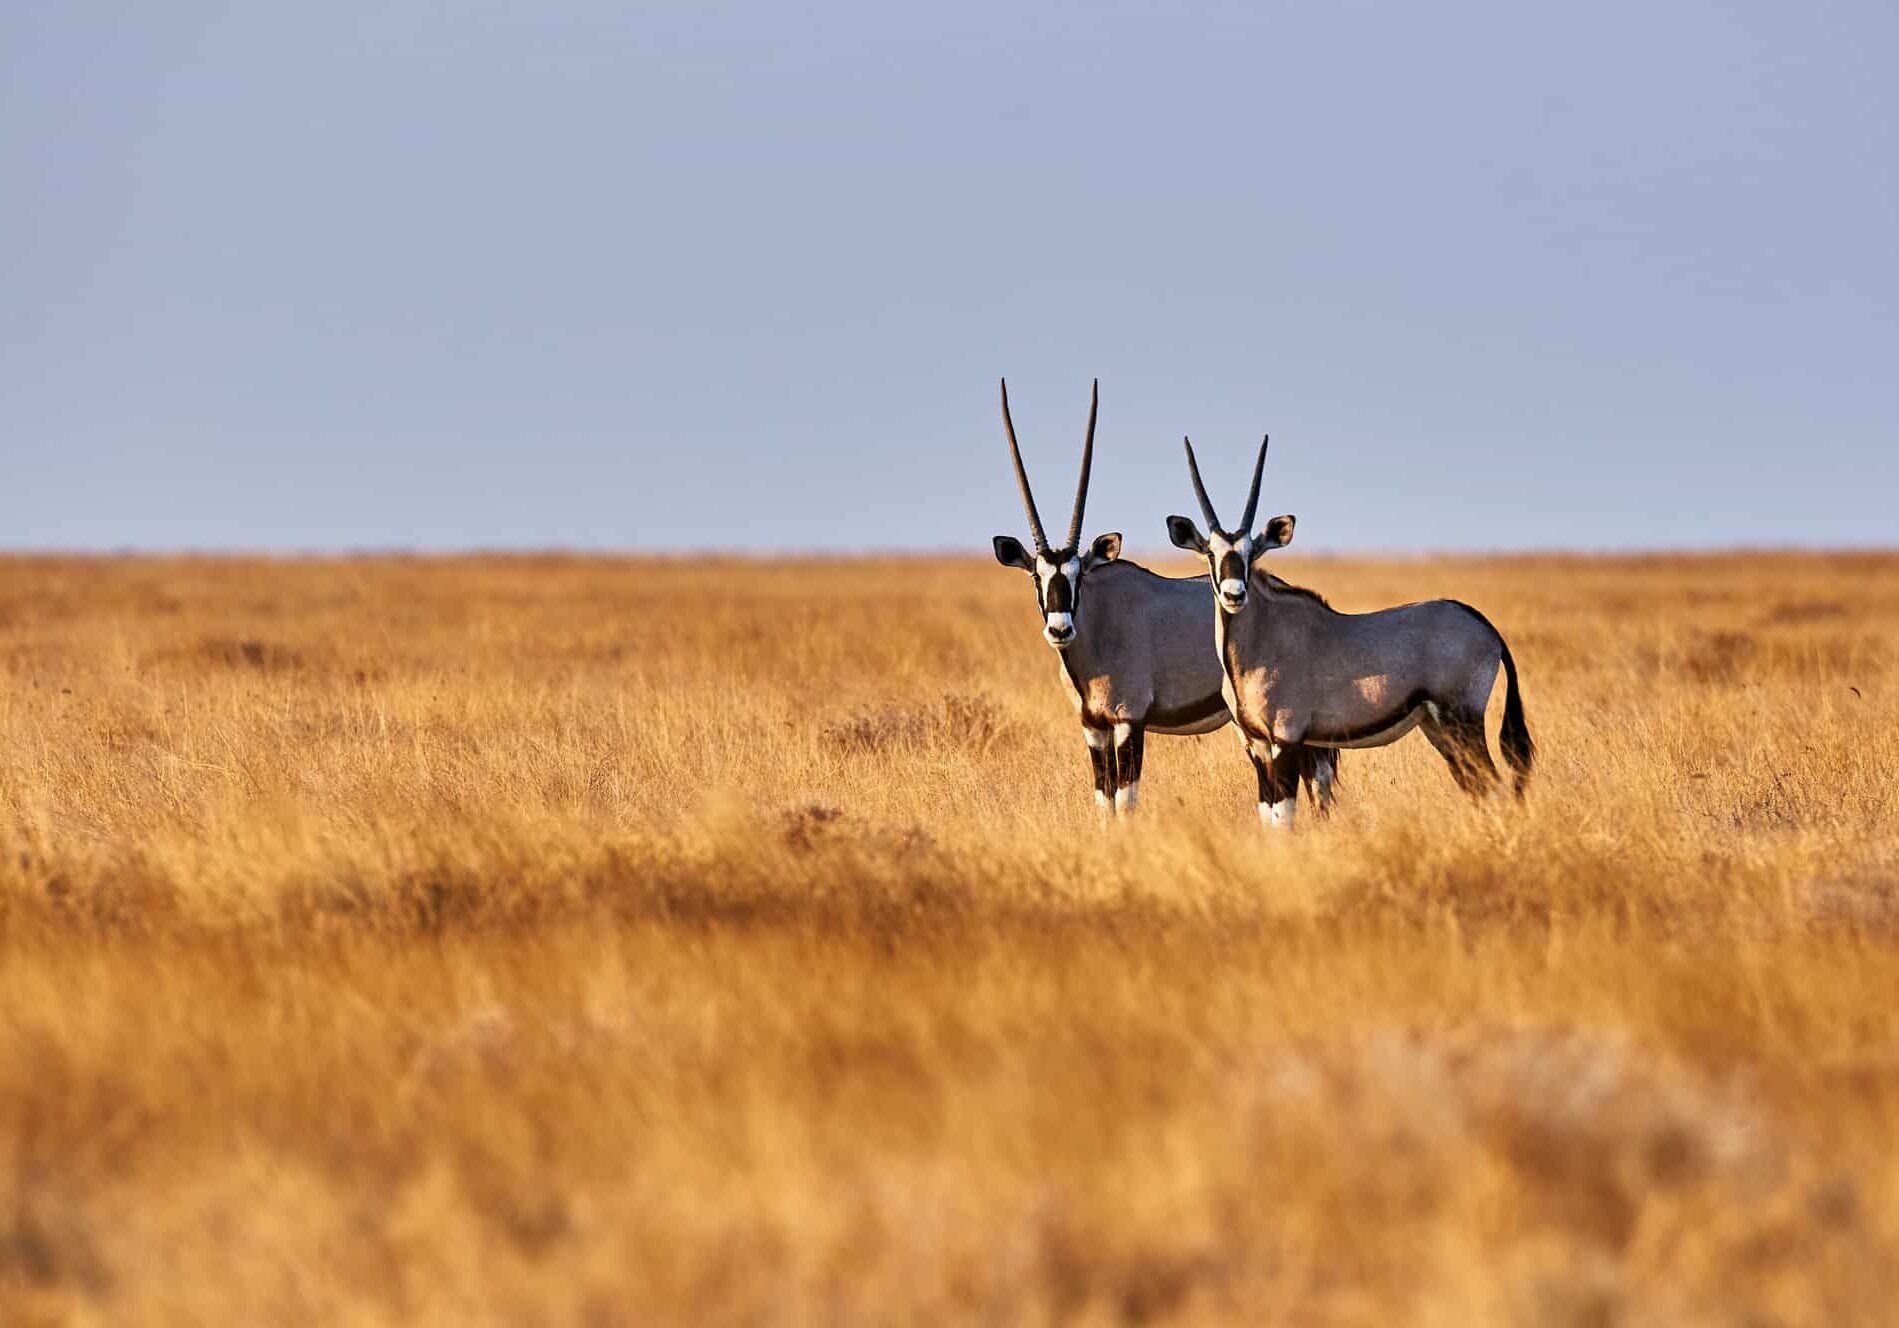 Two beautiful oryx in the savannah of Etosha National Park in Namibia